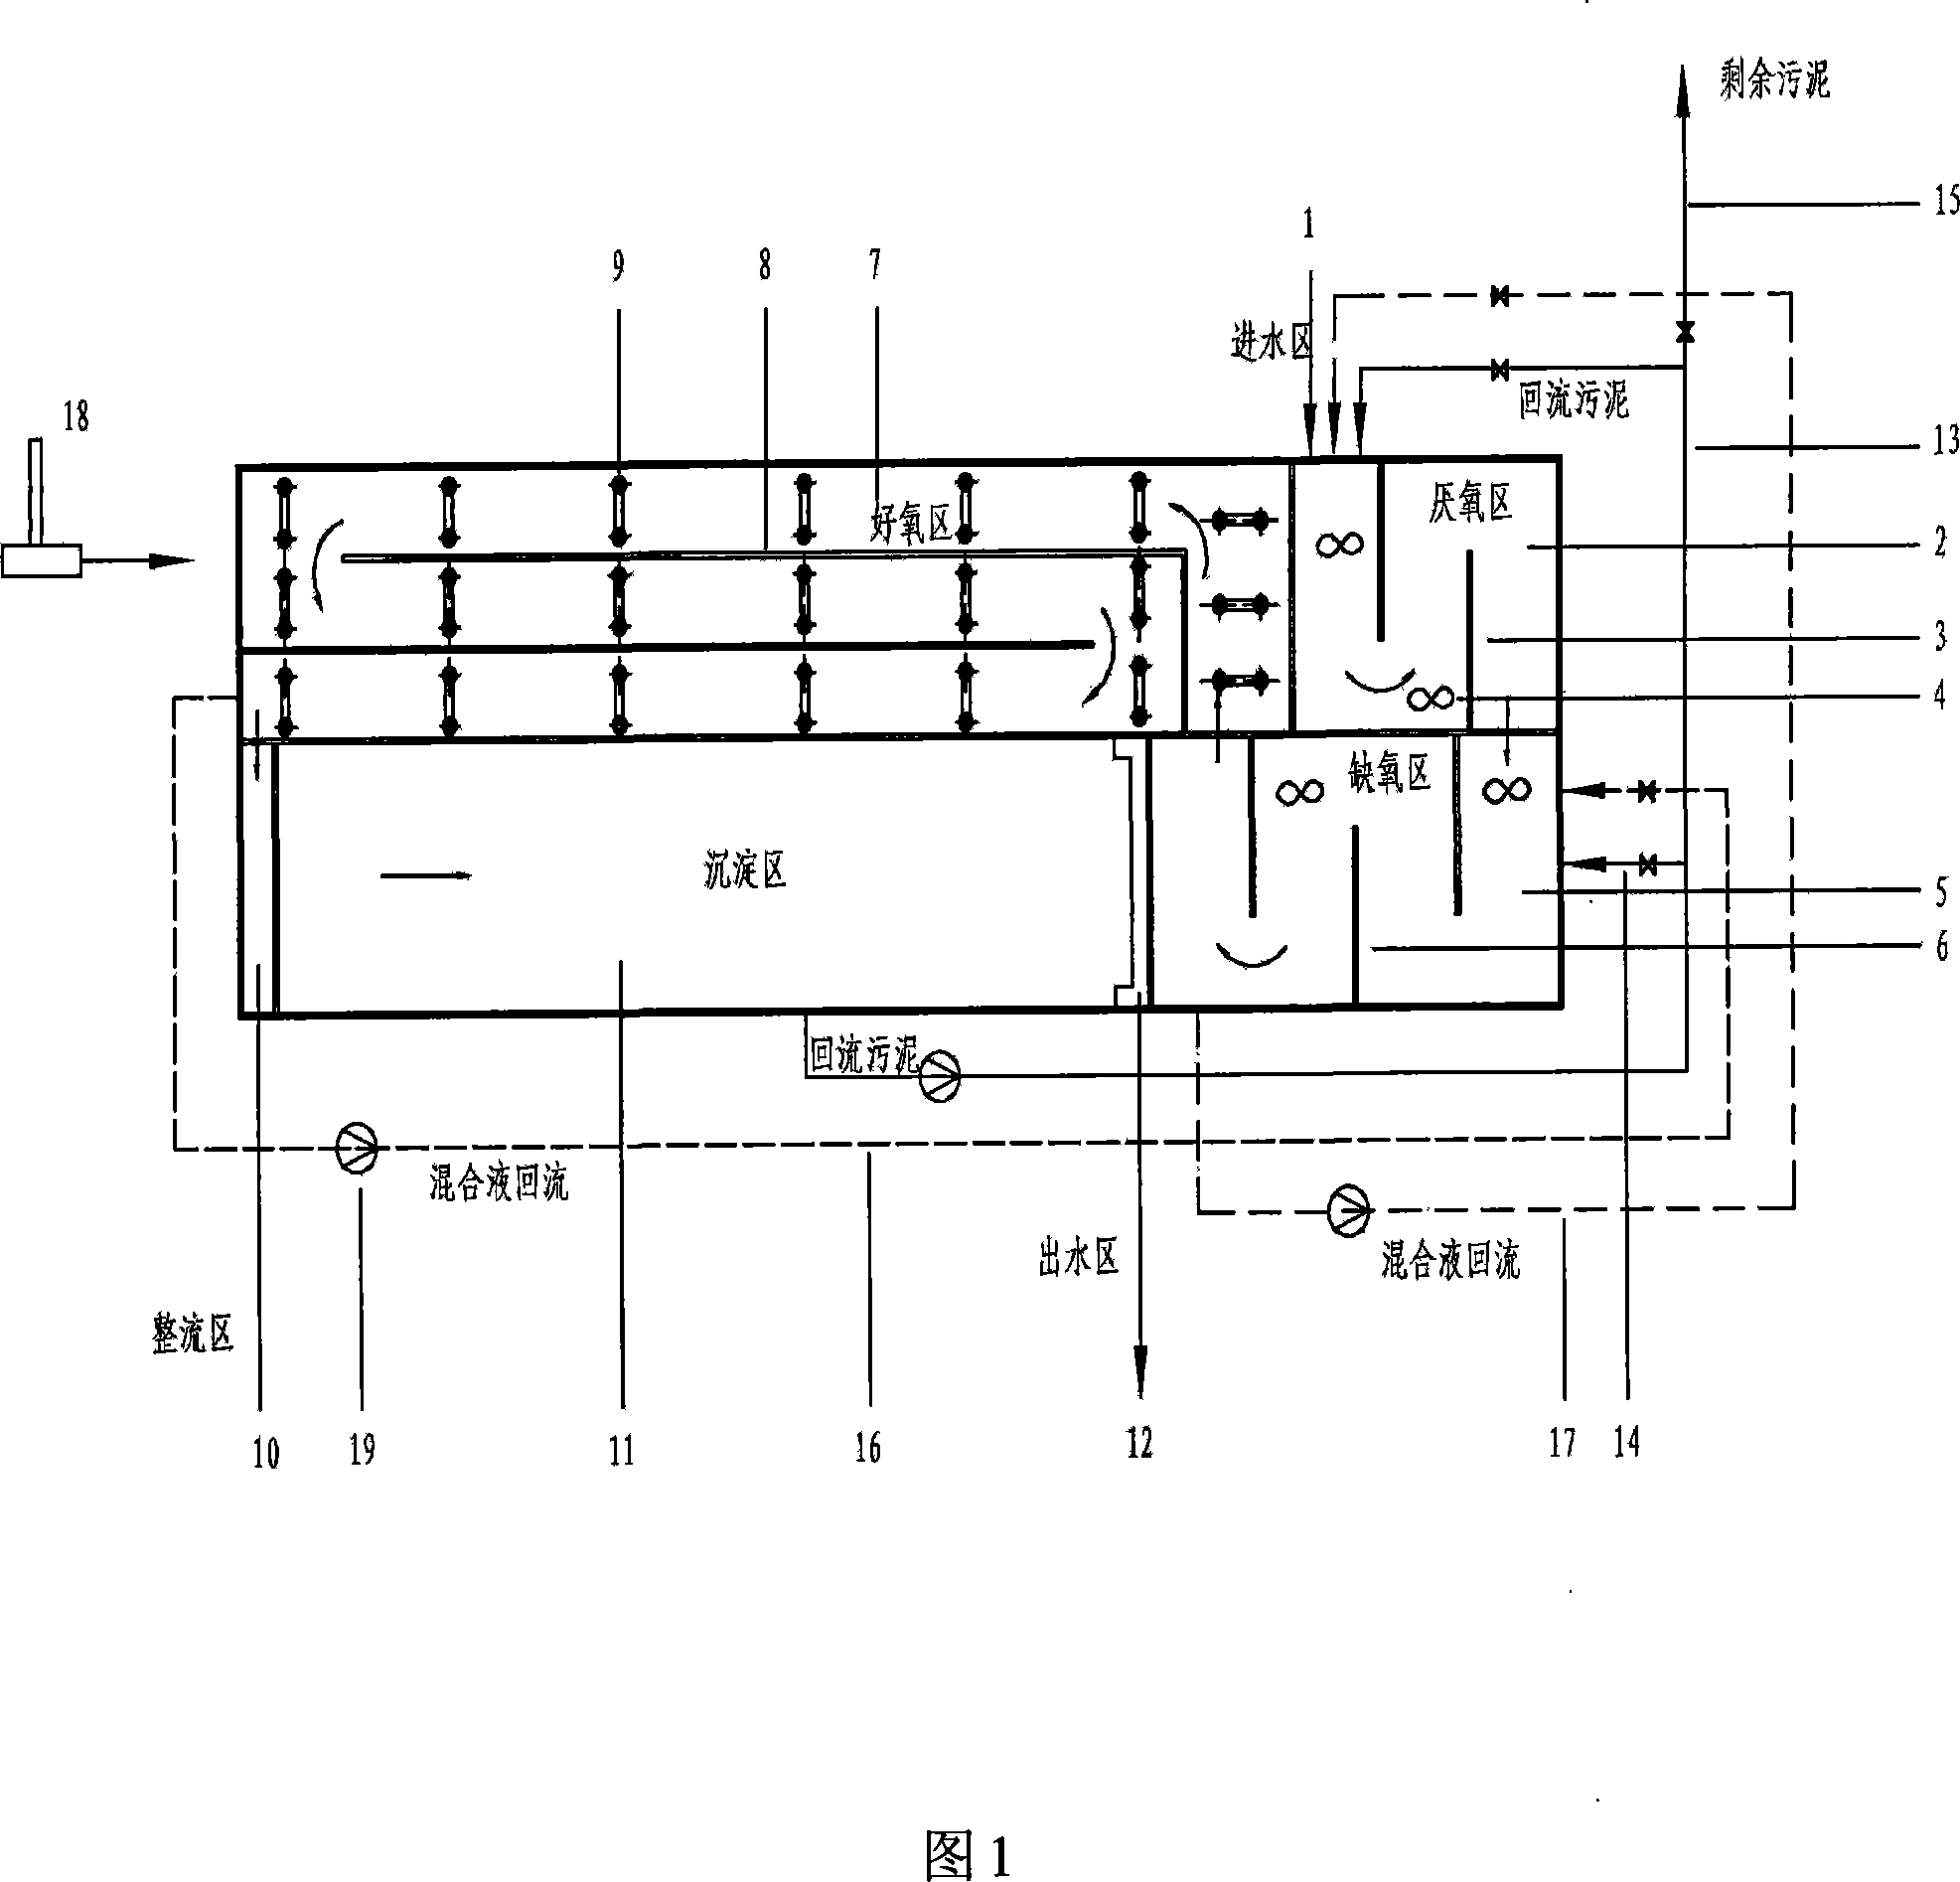 Integral combined process treatment reactor for city sewage